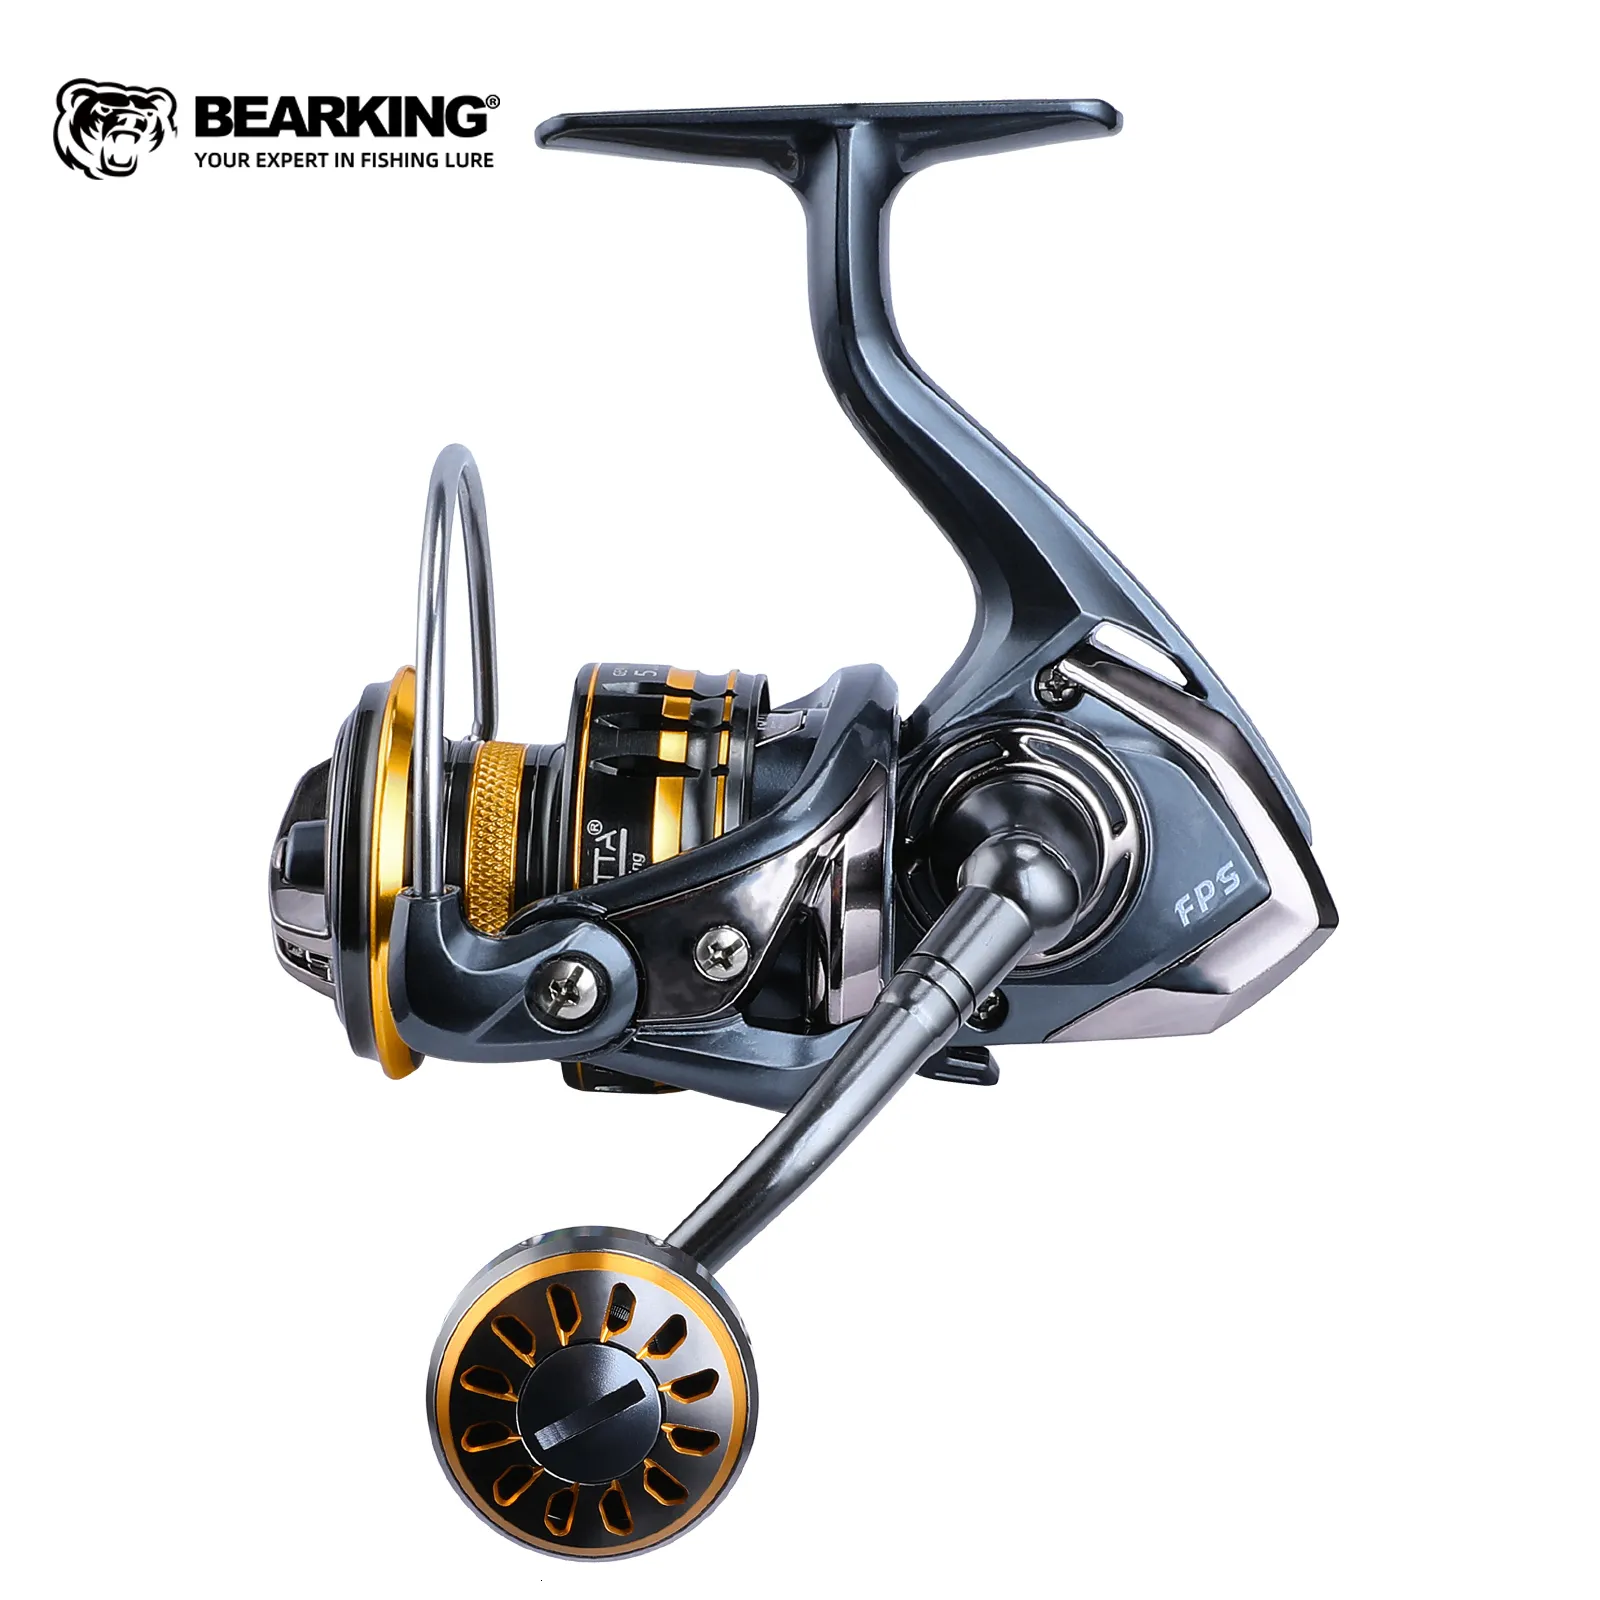 Fishing Accessories BEARKING Brand Arrival Saltwater Reel Spinning 1000 6000  9 1BB 5 2 1 Max Drag 12KG Water Proof Reels 230825 From Kang07, $29.61